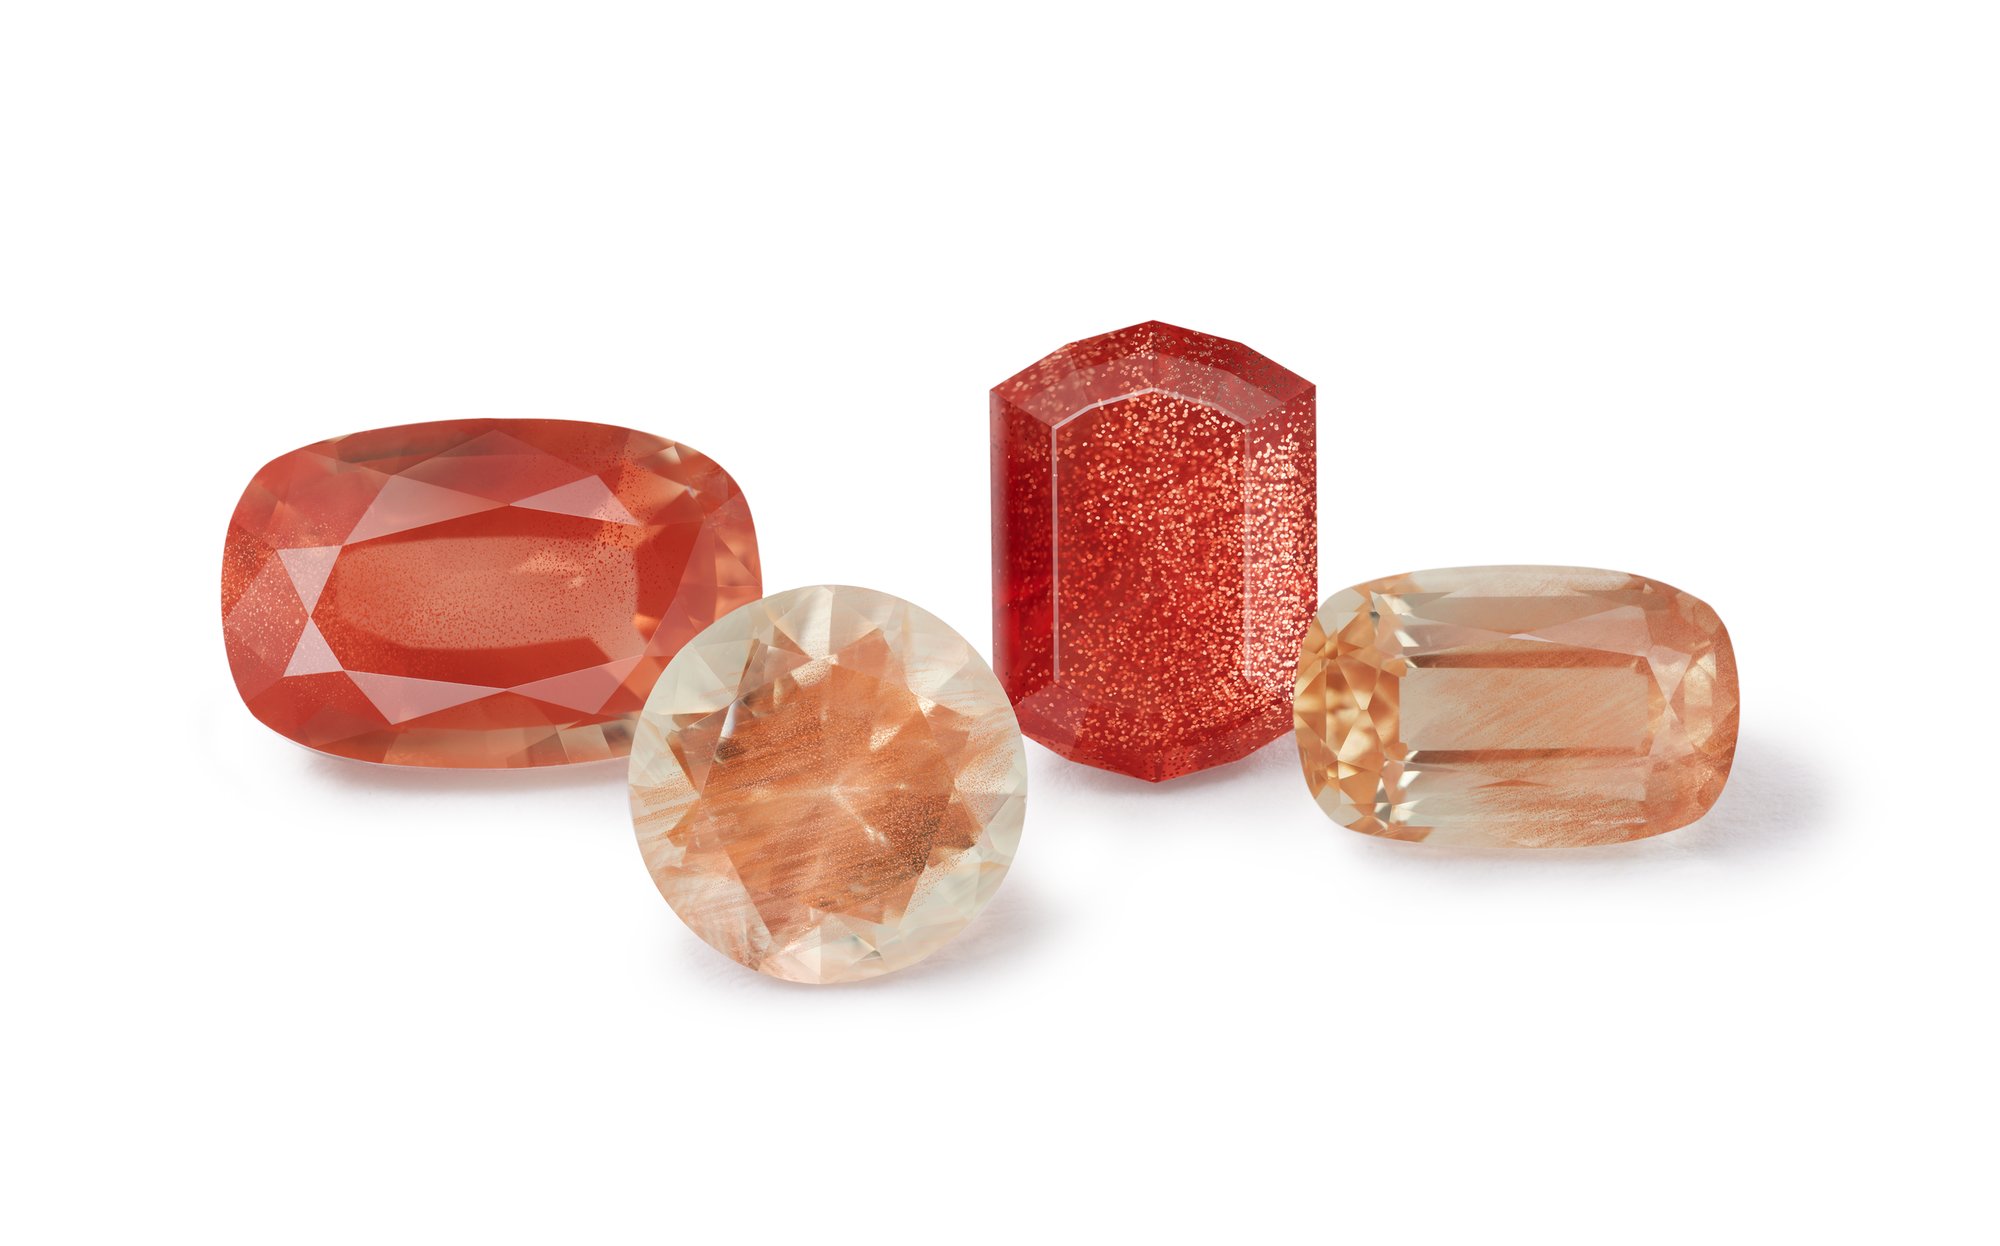 Ethically Sourced Gemstones